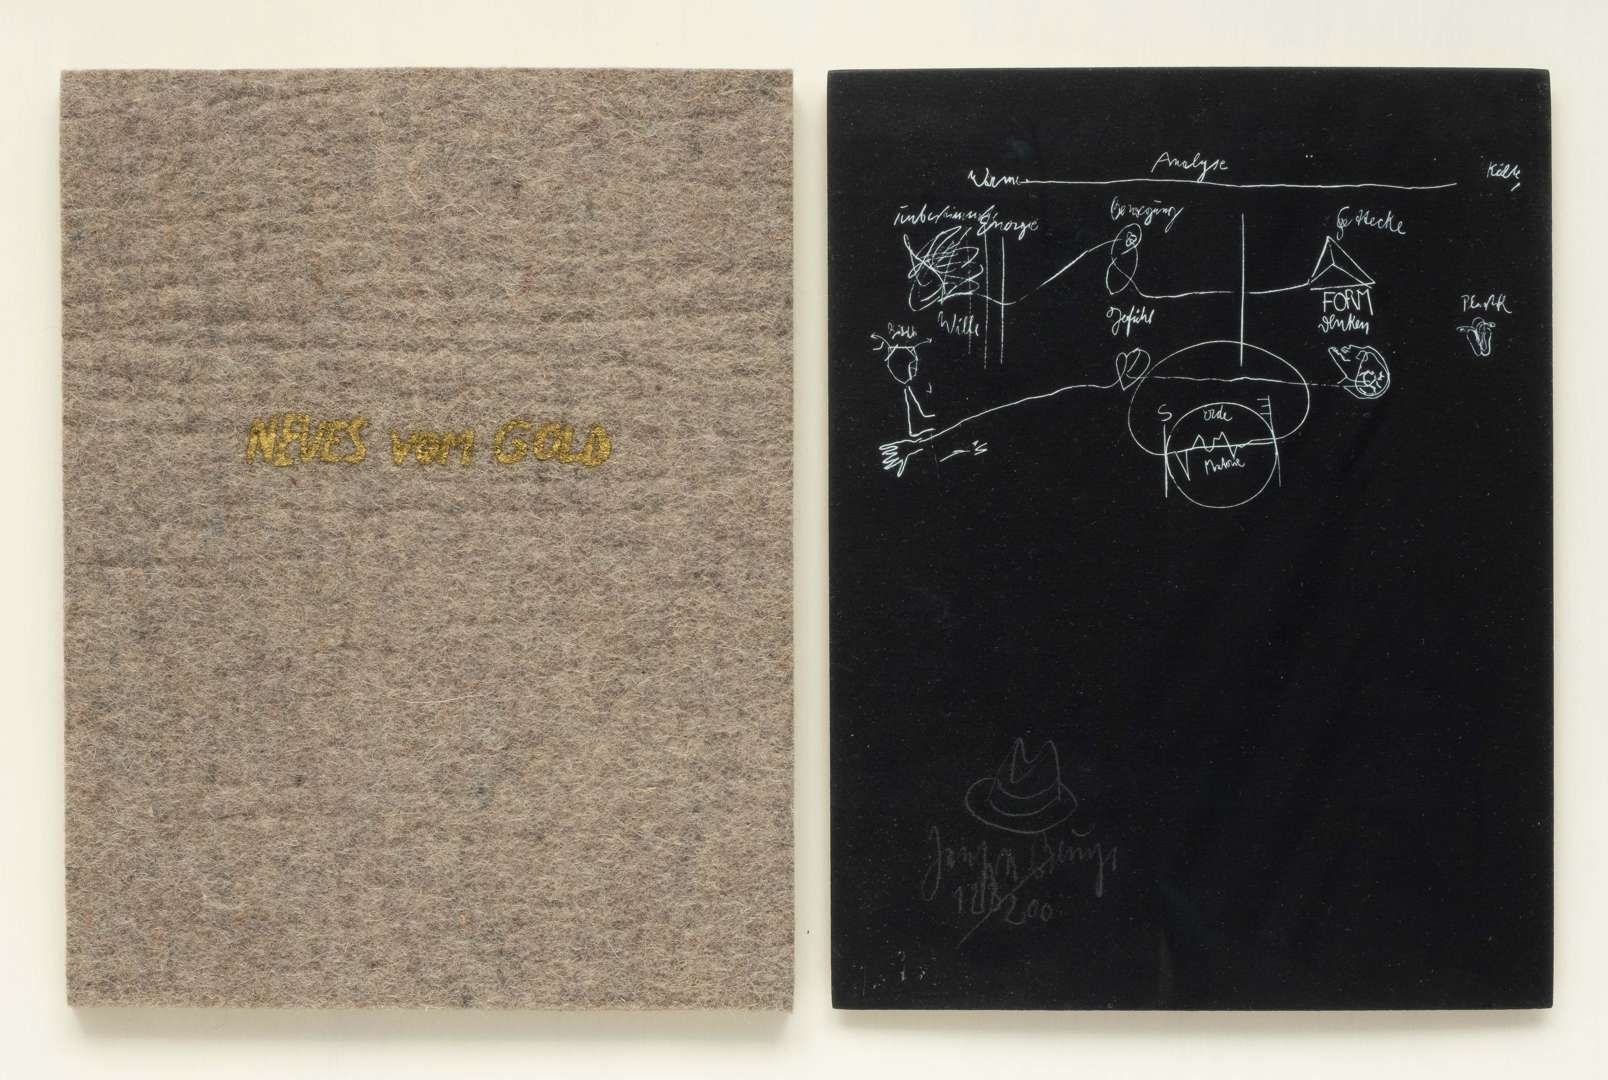 Neues from Gold (Nieuws from the Gold - Joseph Beuys